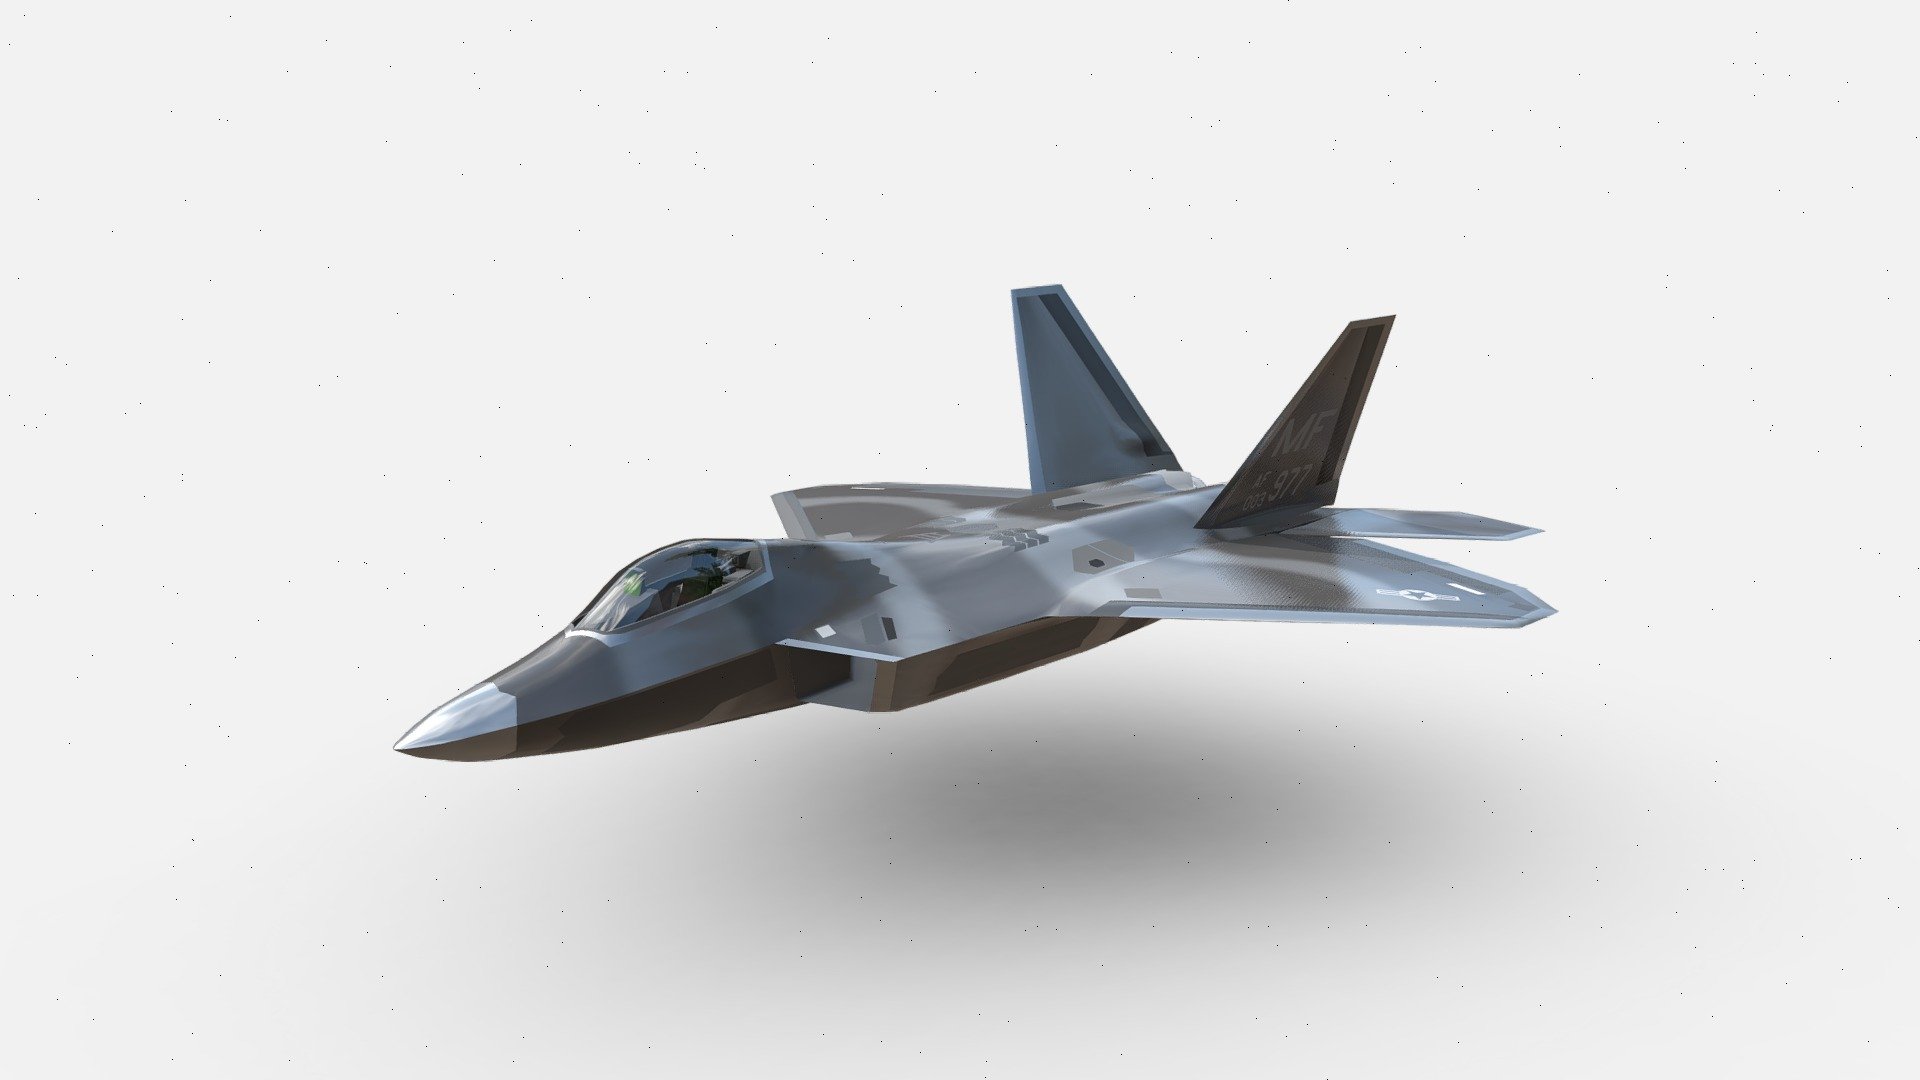 This highly detailed 3D model depicts the iconic Lockheed Martin F-22 Raptor, a fifth-generation fighter jet known for its advanced stealth and unparalleled maneuverability. The model is meticulously crafted to capture the intricate design and features of the real aircraft, making it ideal for aviation enthusiasts, game developers, and 3D visualization projects. Whether you're creating simulations, animations, or simply admiring the engineering marvel, this F-22 Raptor model is a stunning addition to your collection 3d model